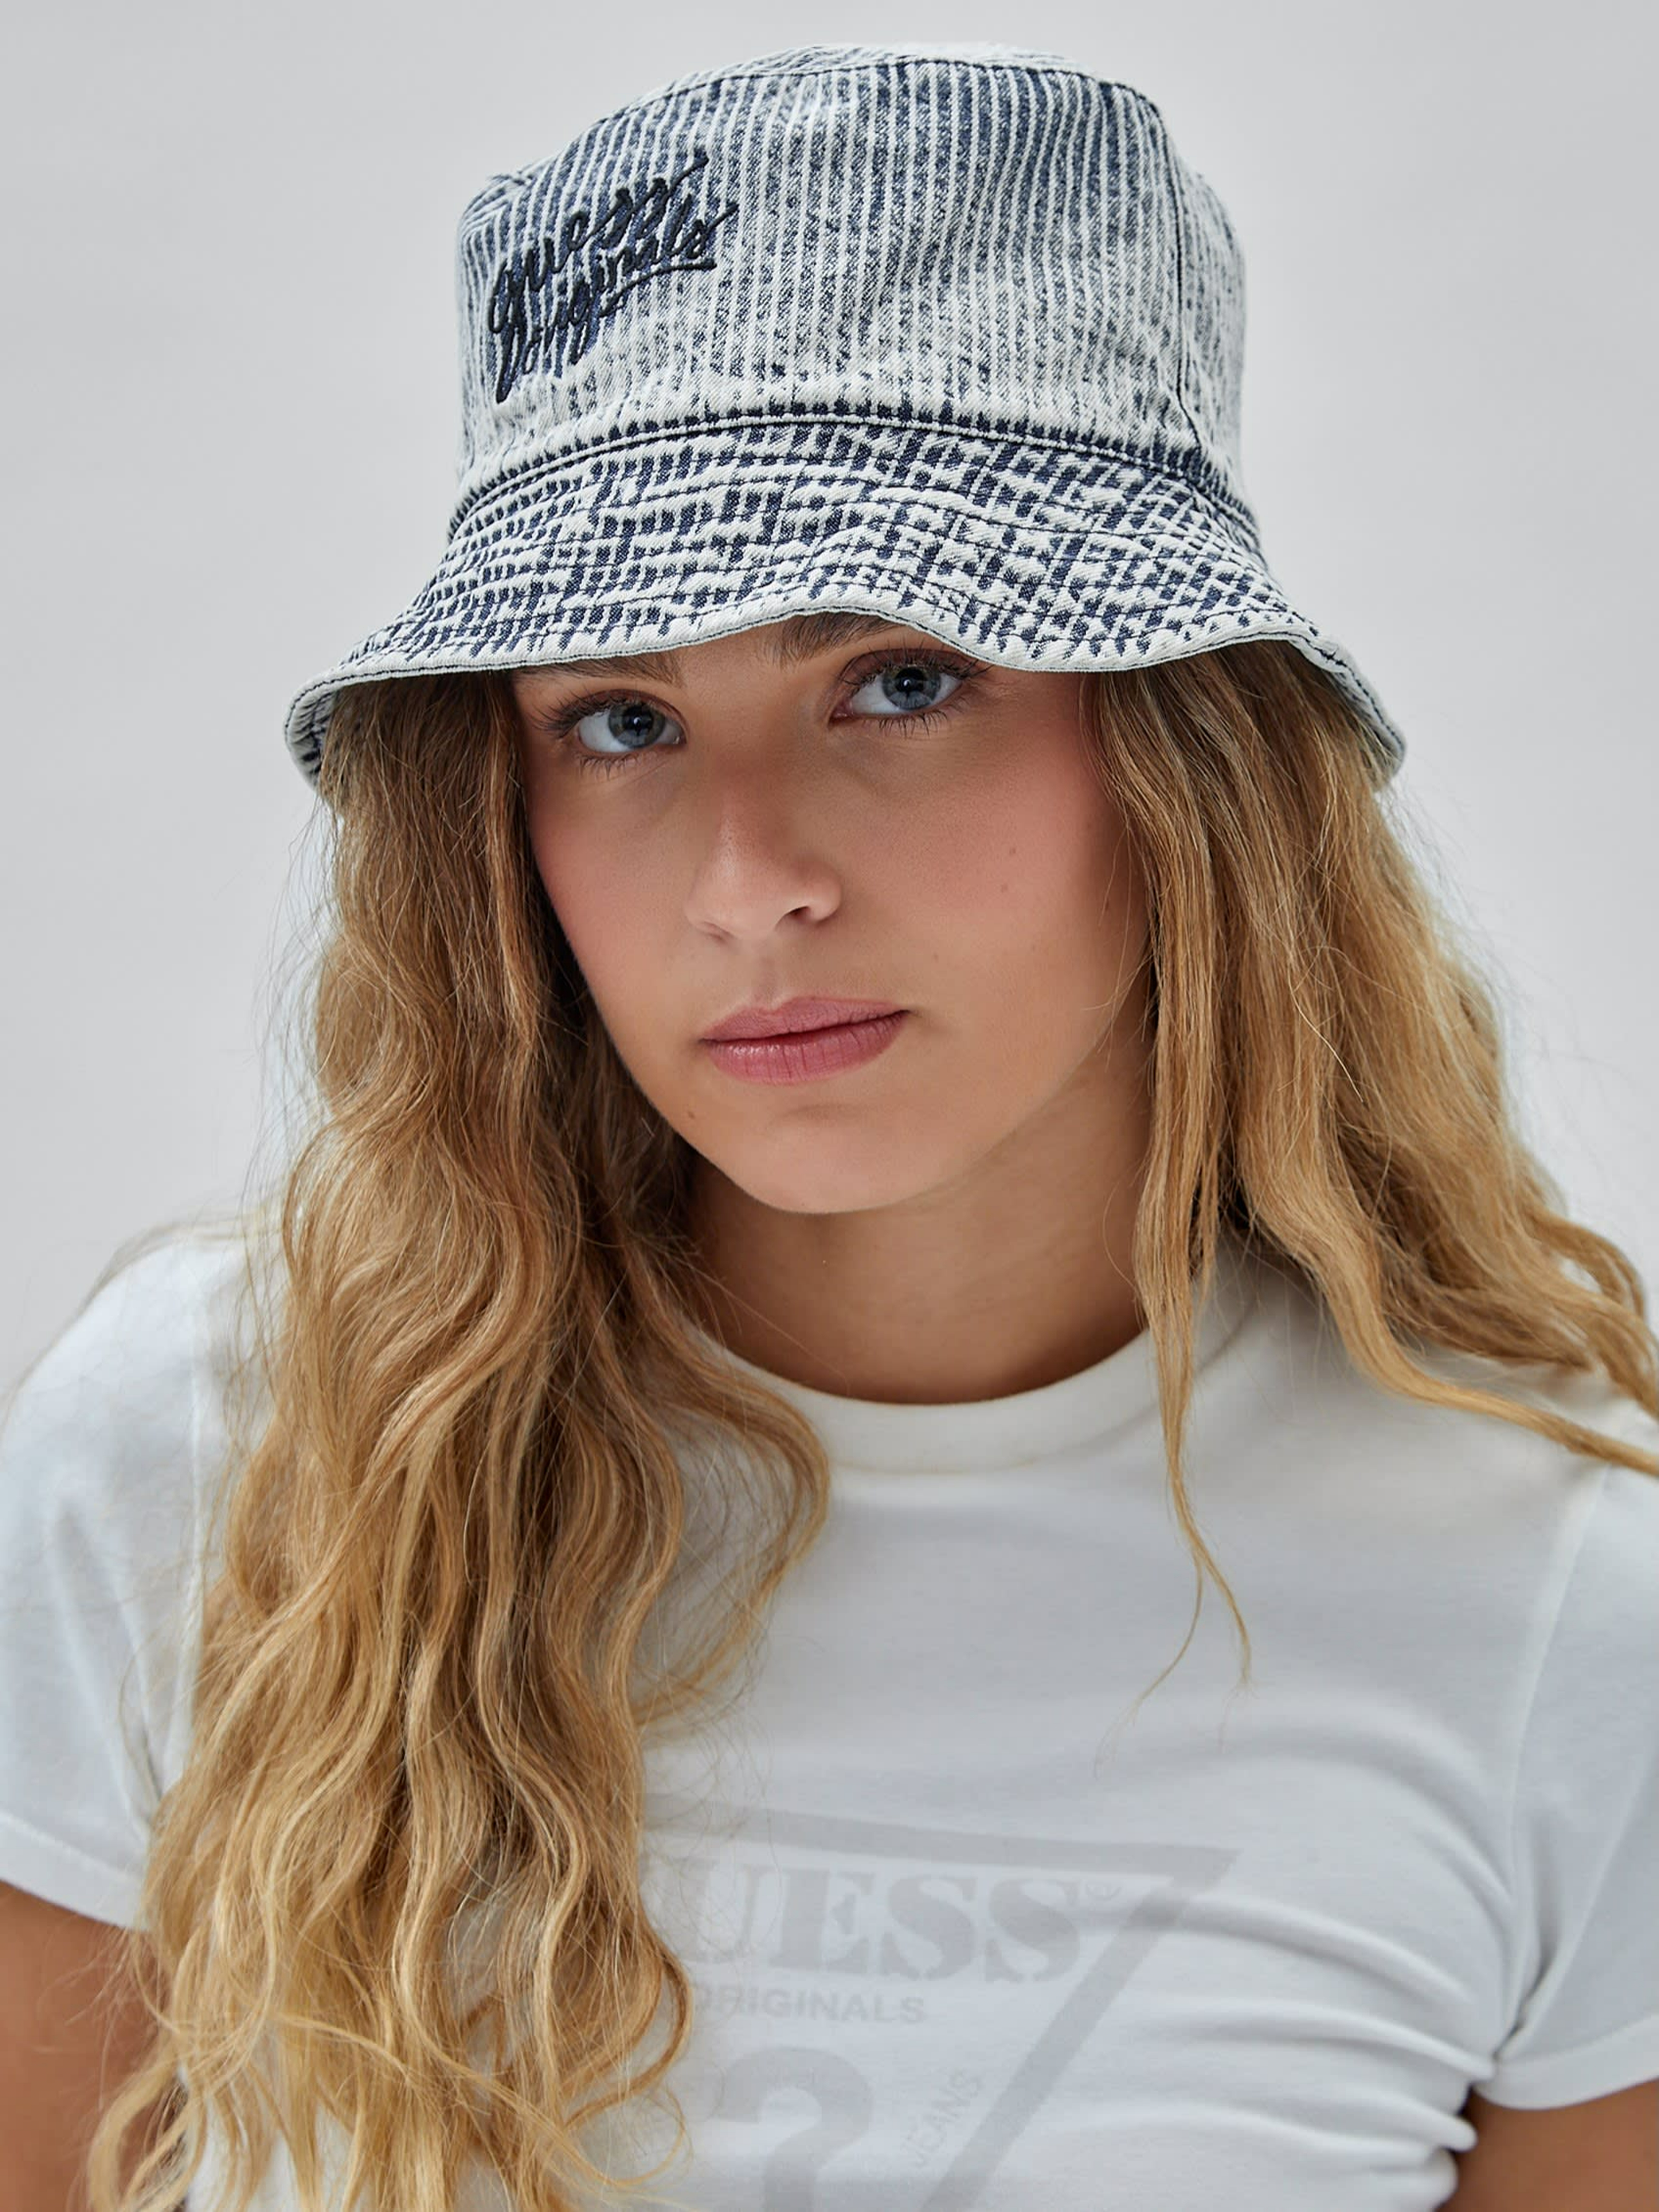 GUESS Originals HICKORY STRIPED BUCKET HAT | Guess Philippines